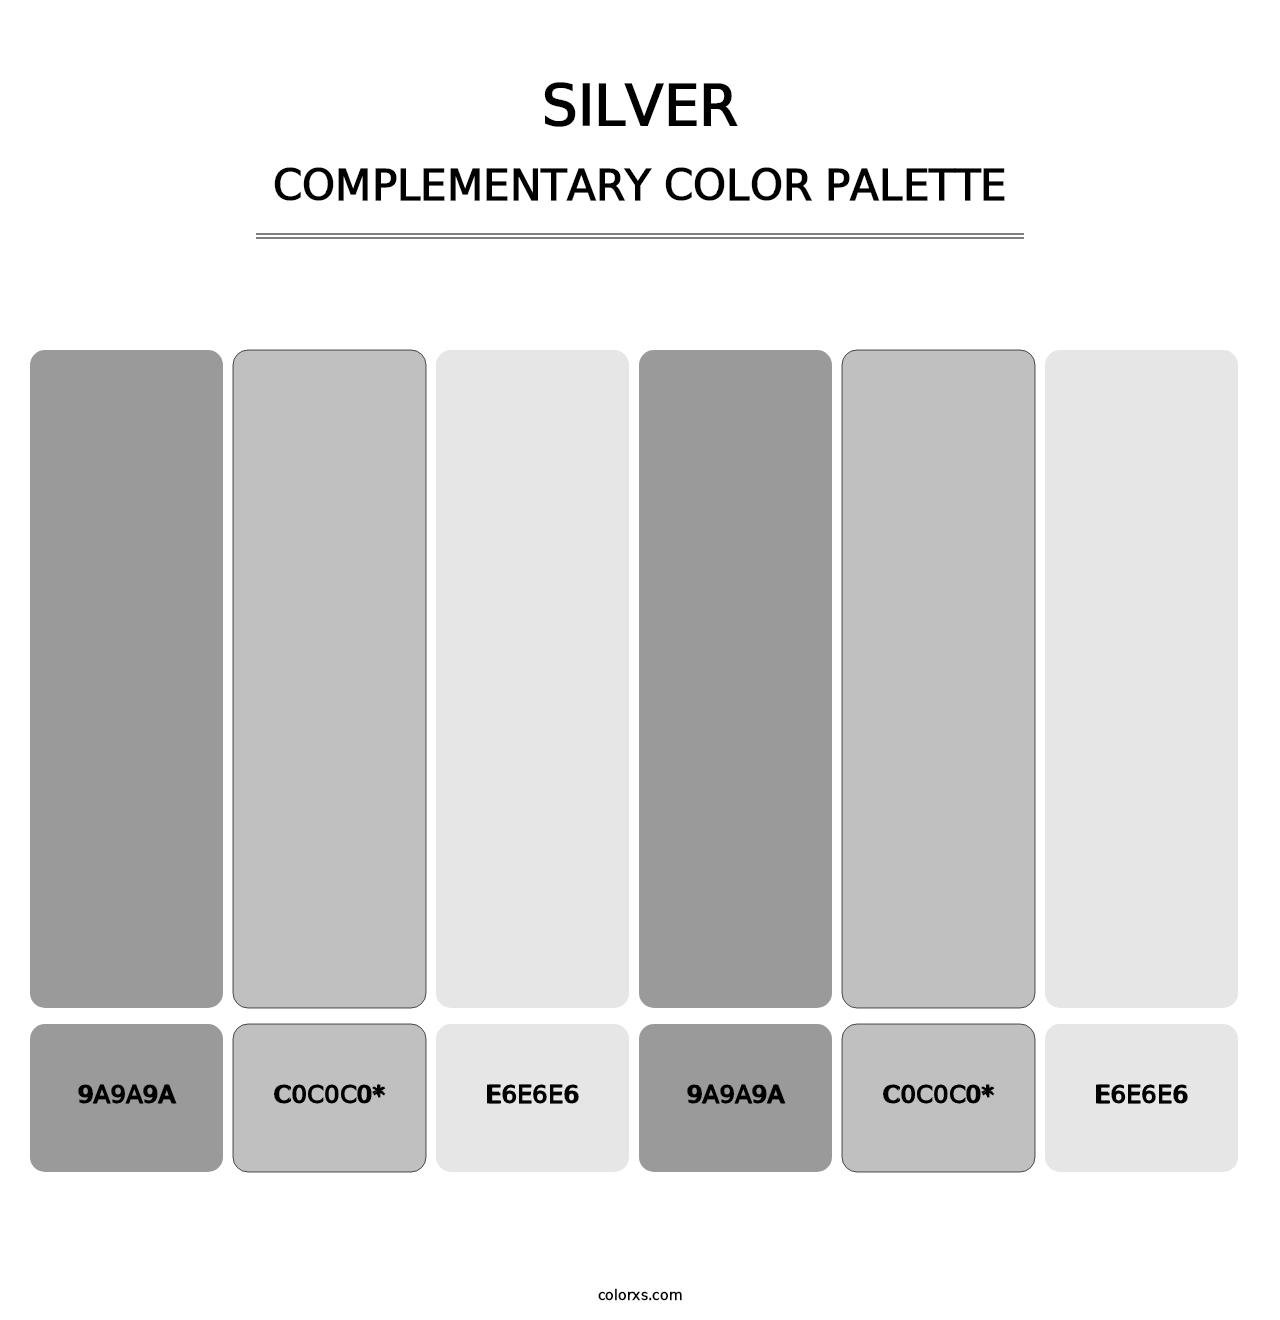 Silver - Complementary Color Palette